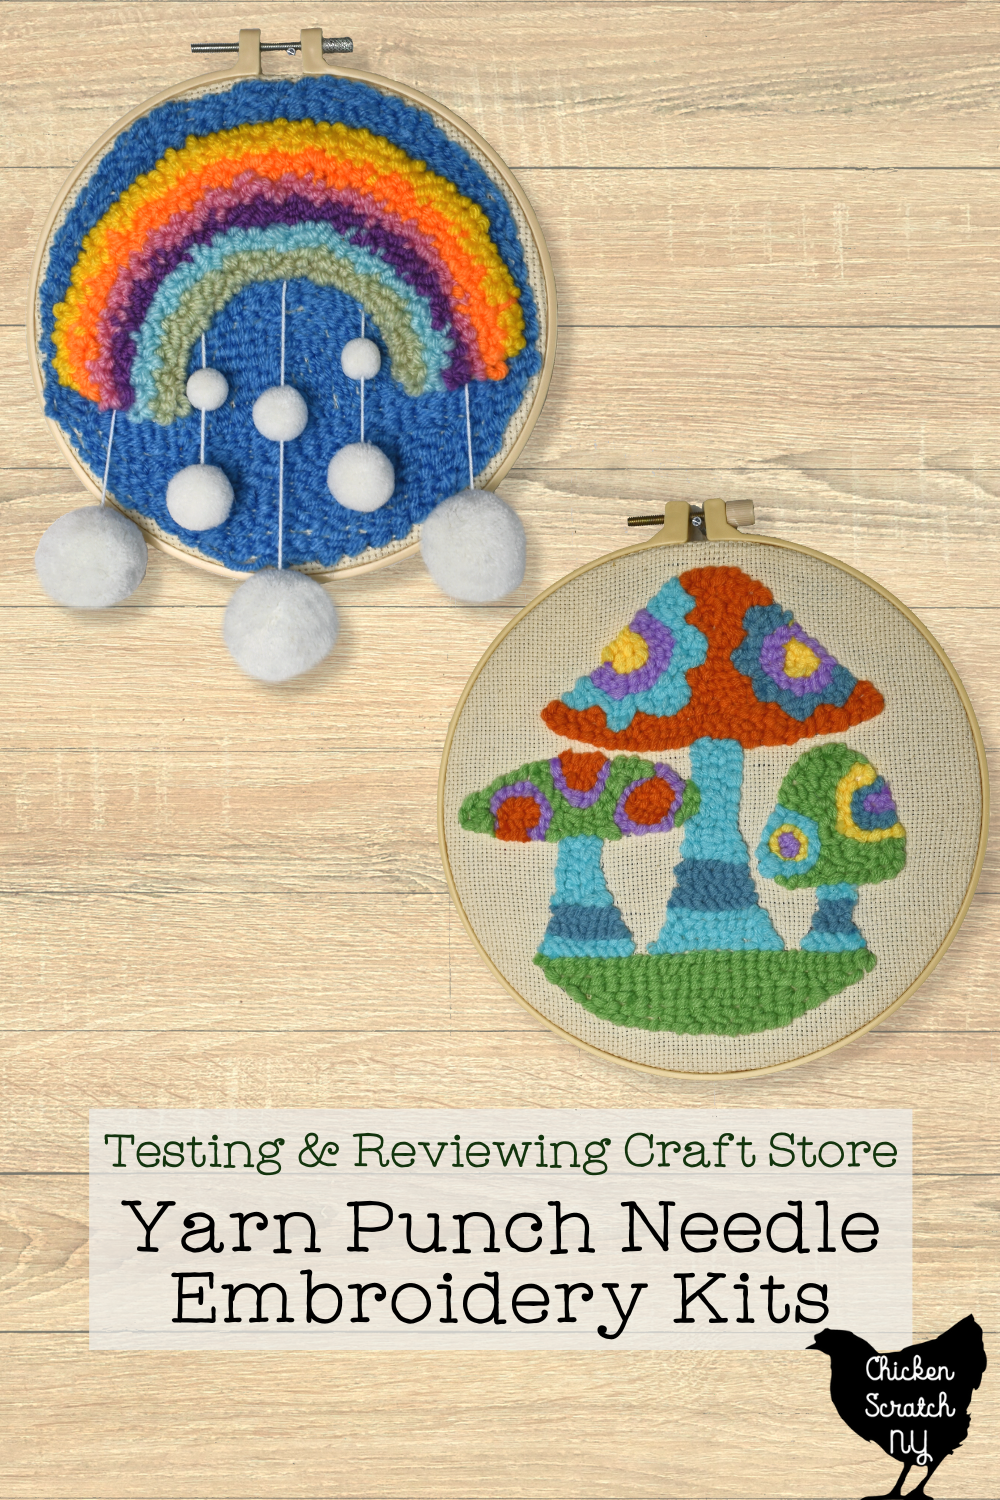 Learn How to Use Punch Needle and Embroidery to Create a Stunning